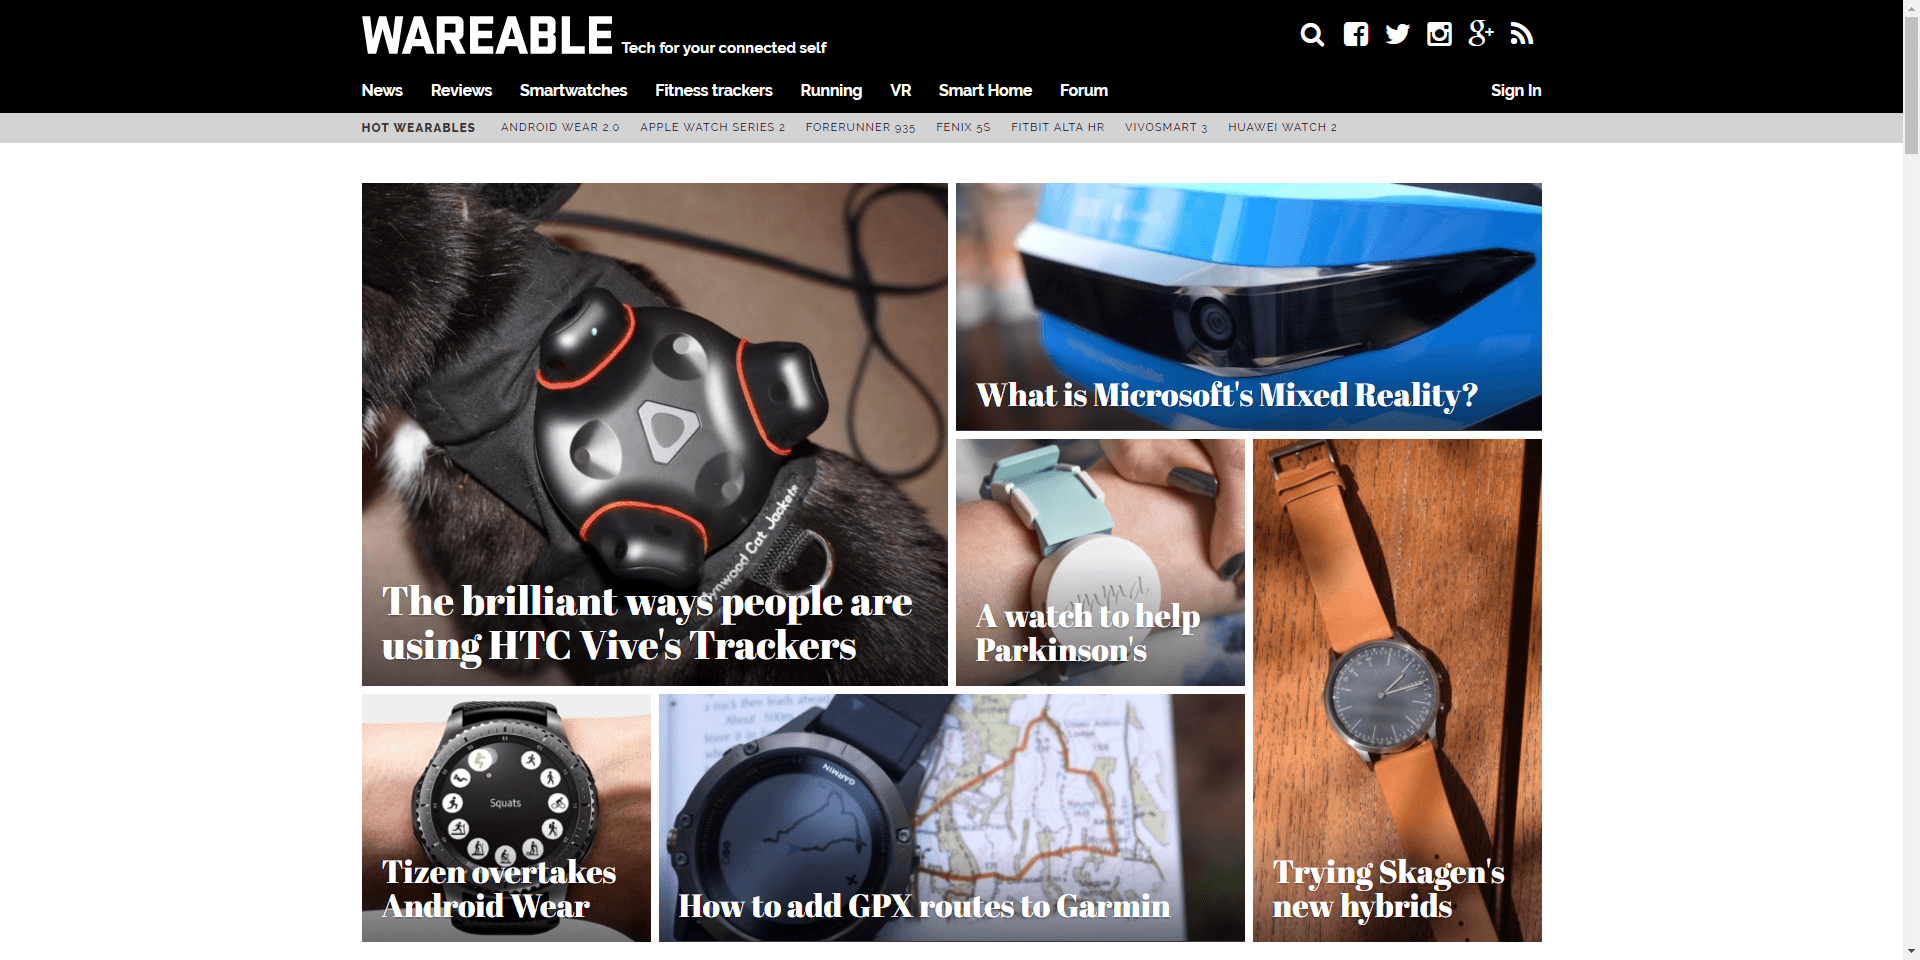 Rebuff Reality featured in wareable.com news article